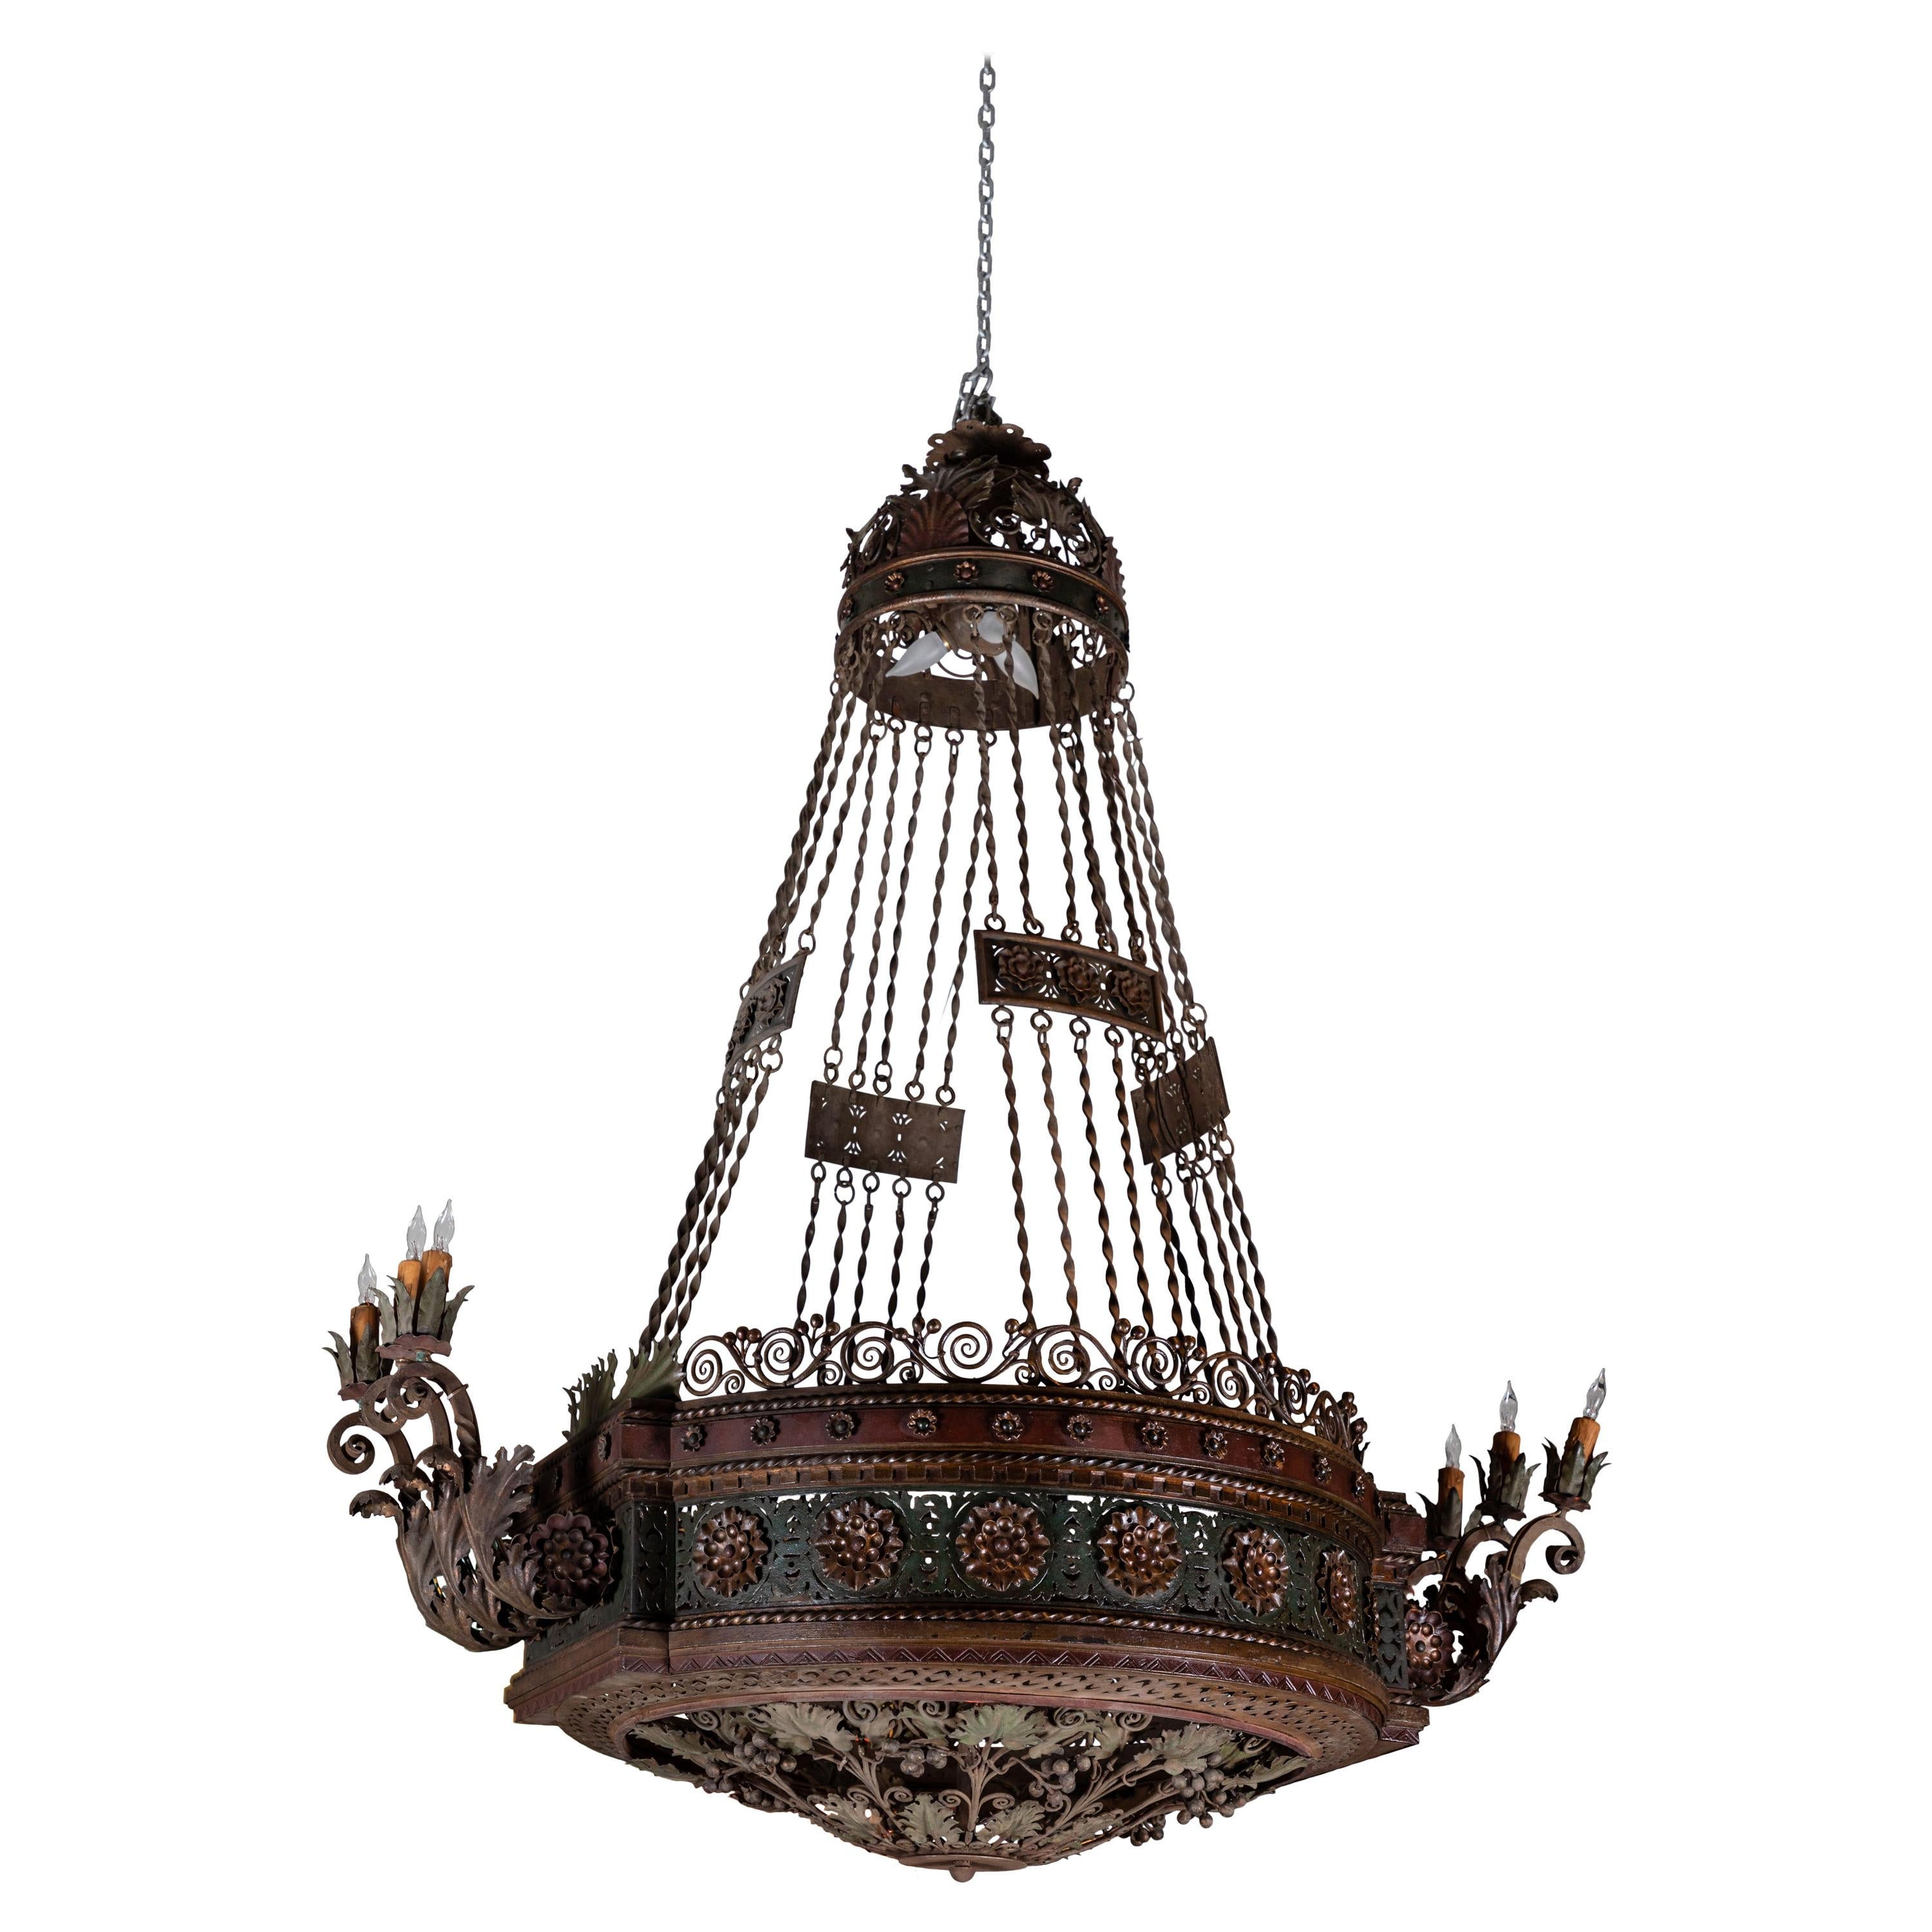 Large, 19th Century Patinated Iron Chandelier